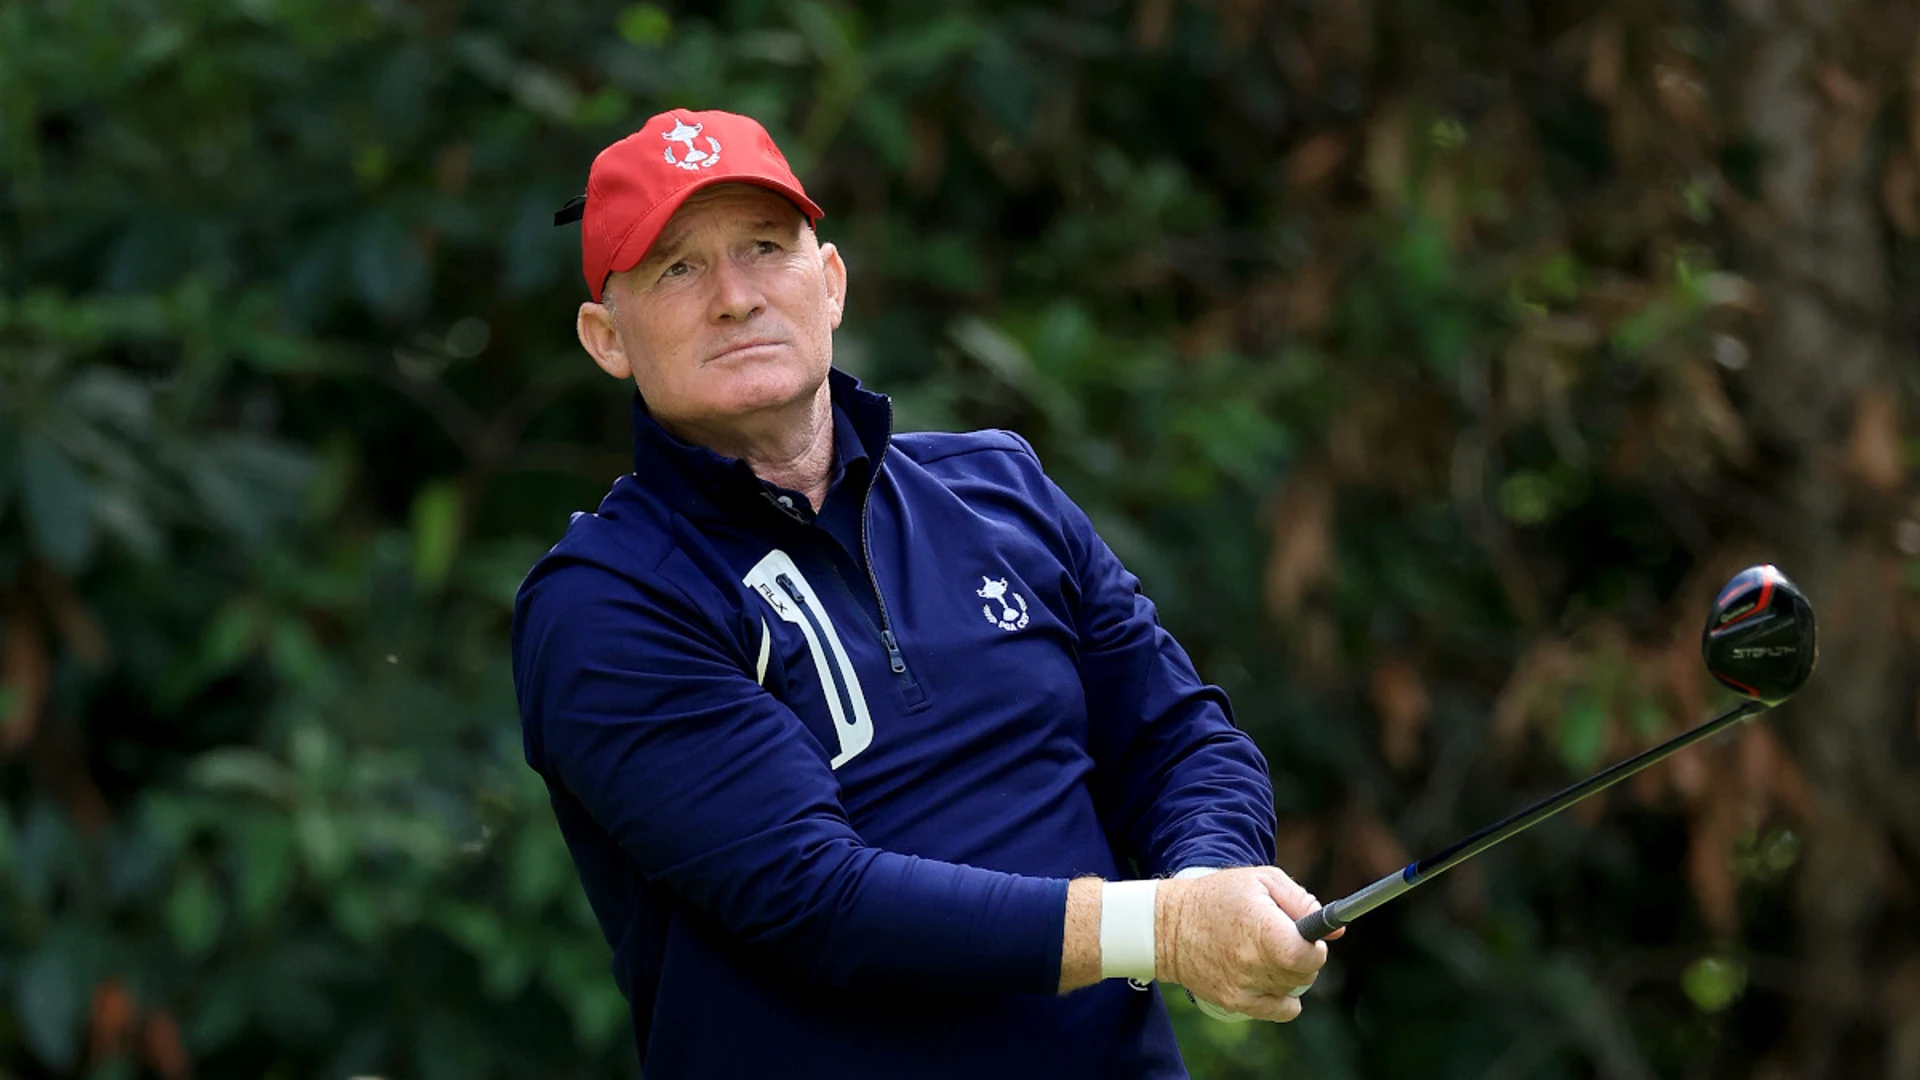 Frank Bensel aces two straight holes at US Senior Open